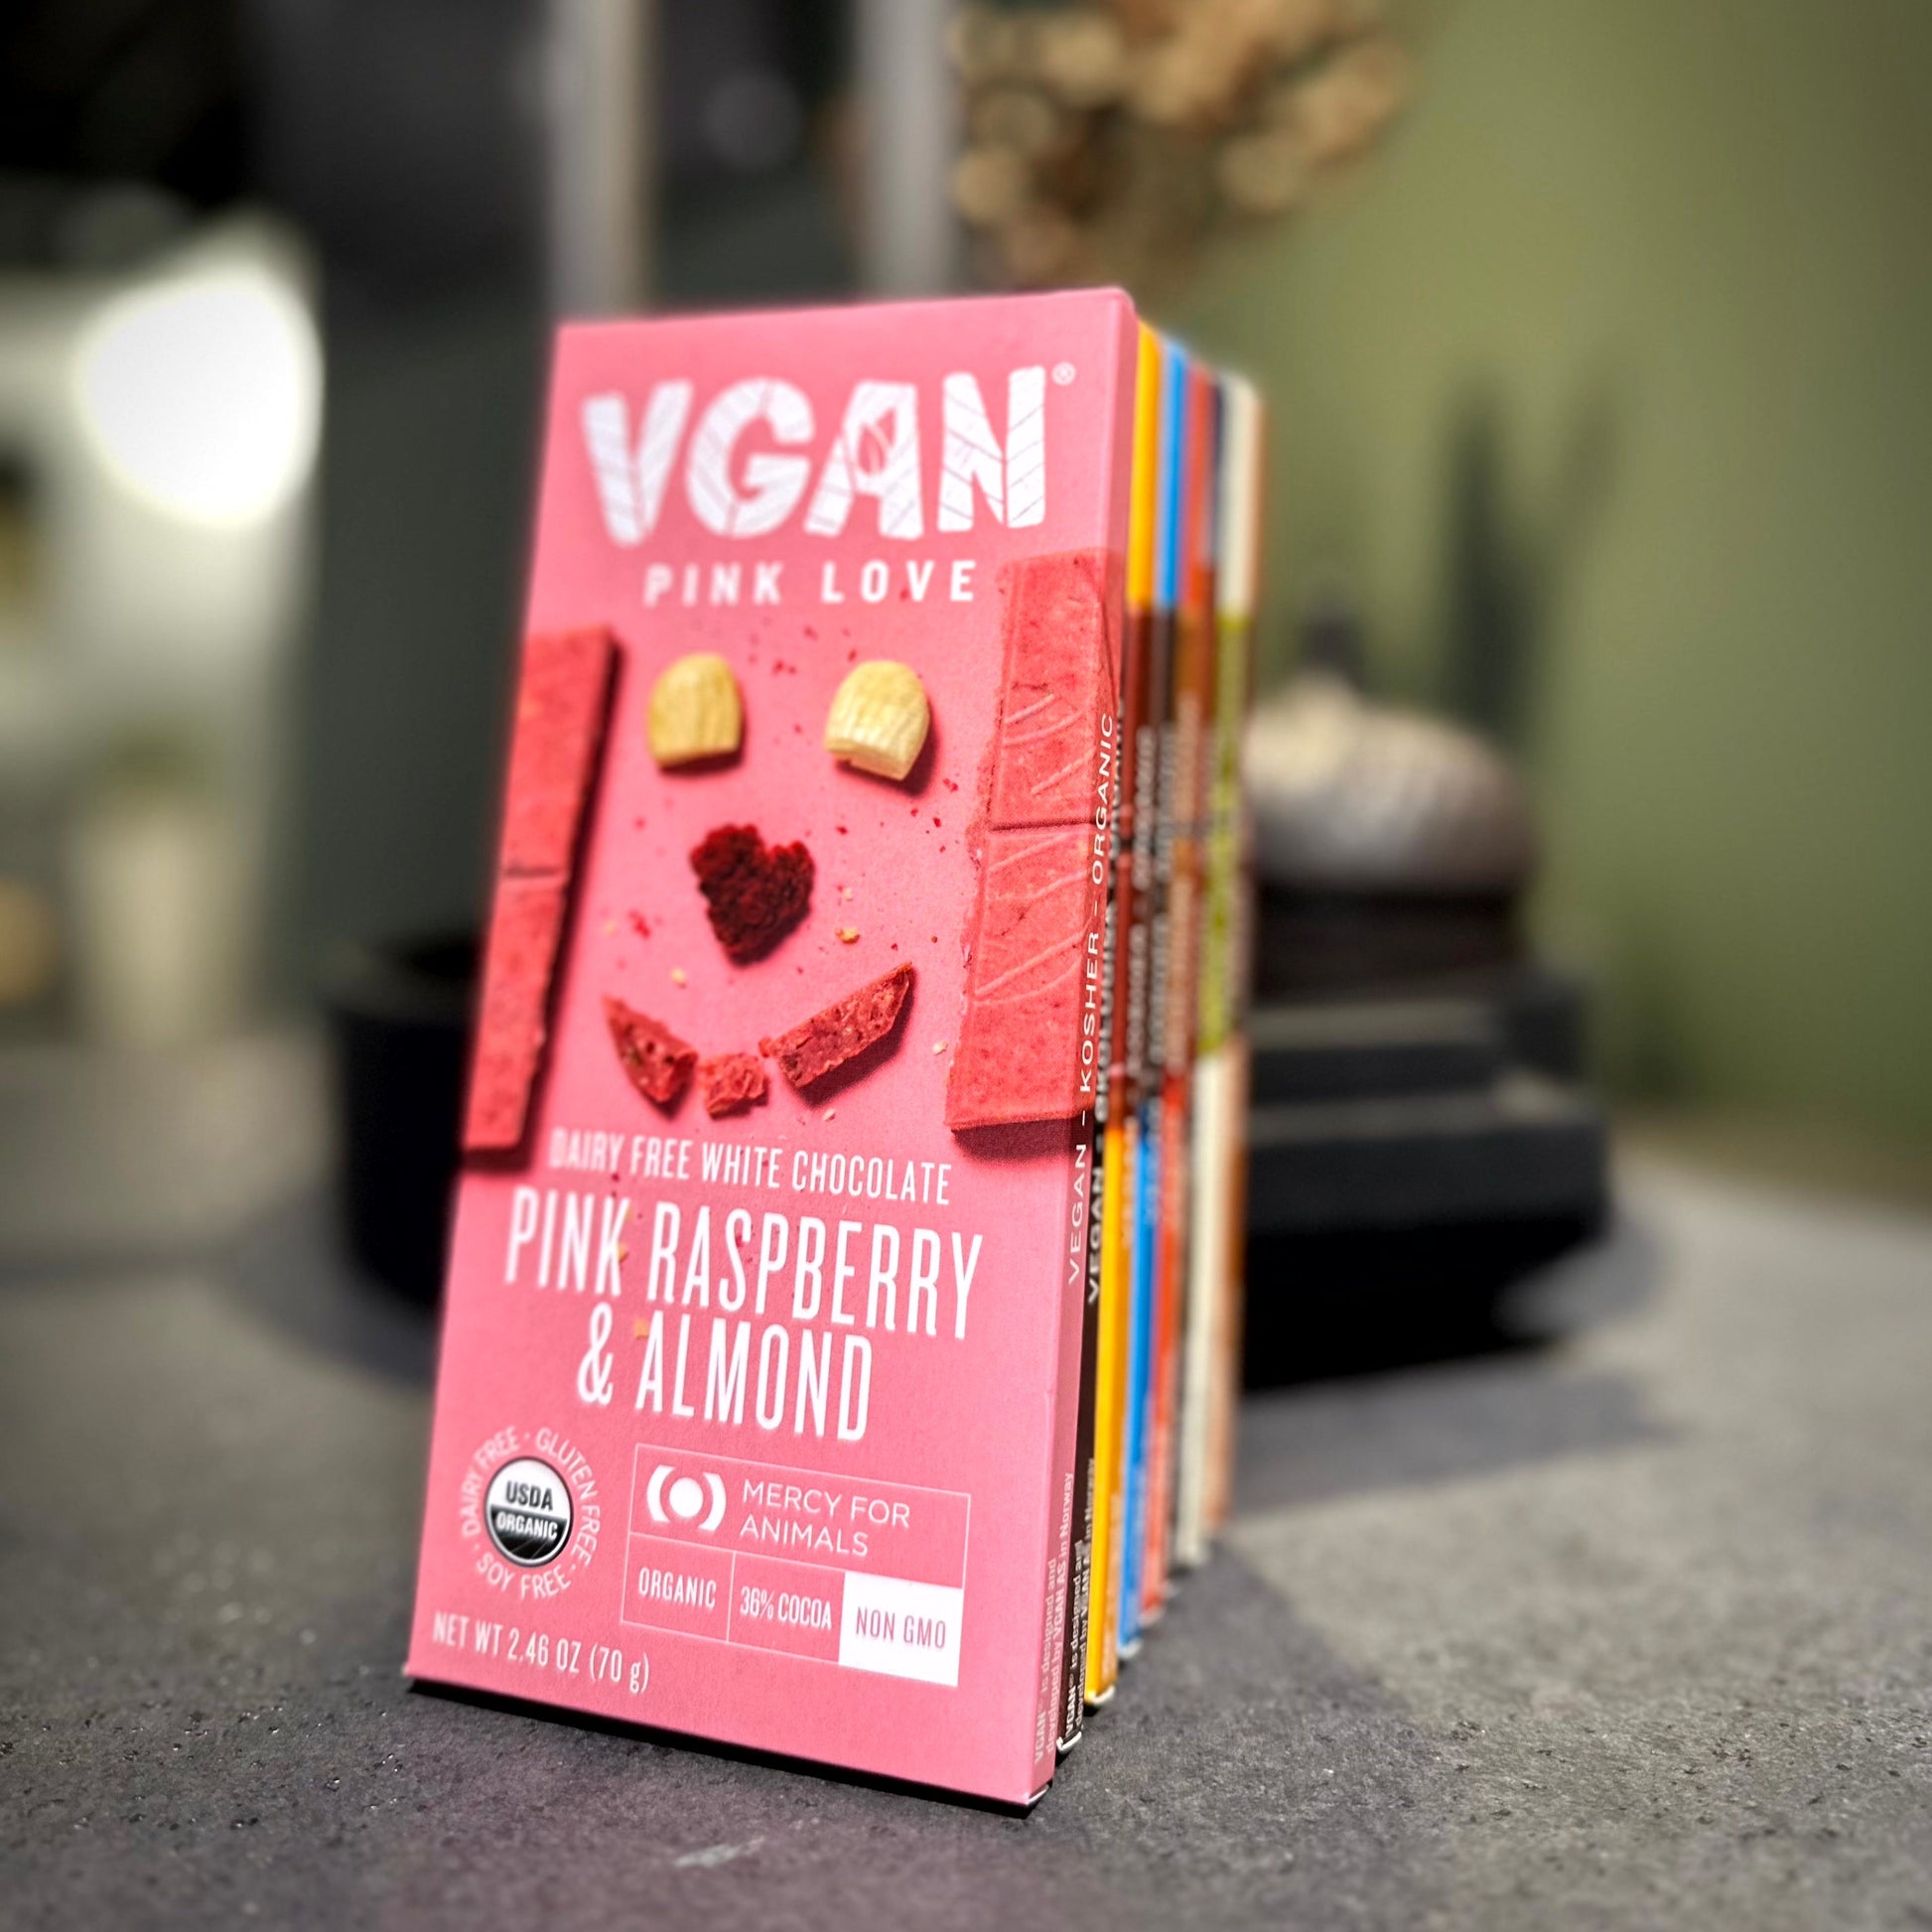 Vegan Chocolates Variety 8 Pack Limited Edition in a bundle with Pink Raspberry and Almond shown in front